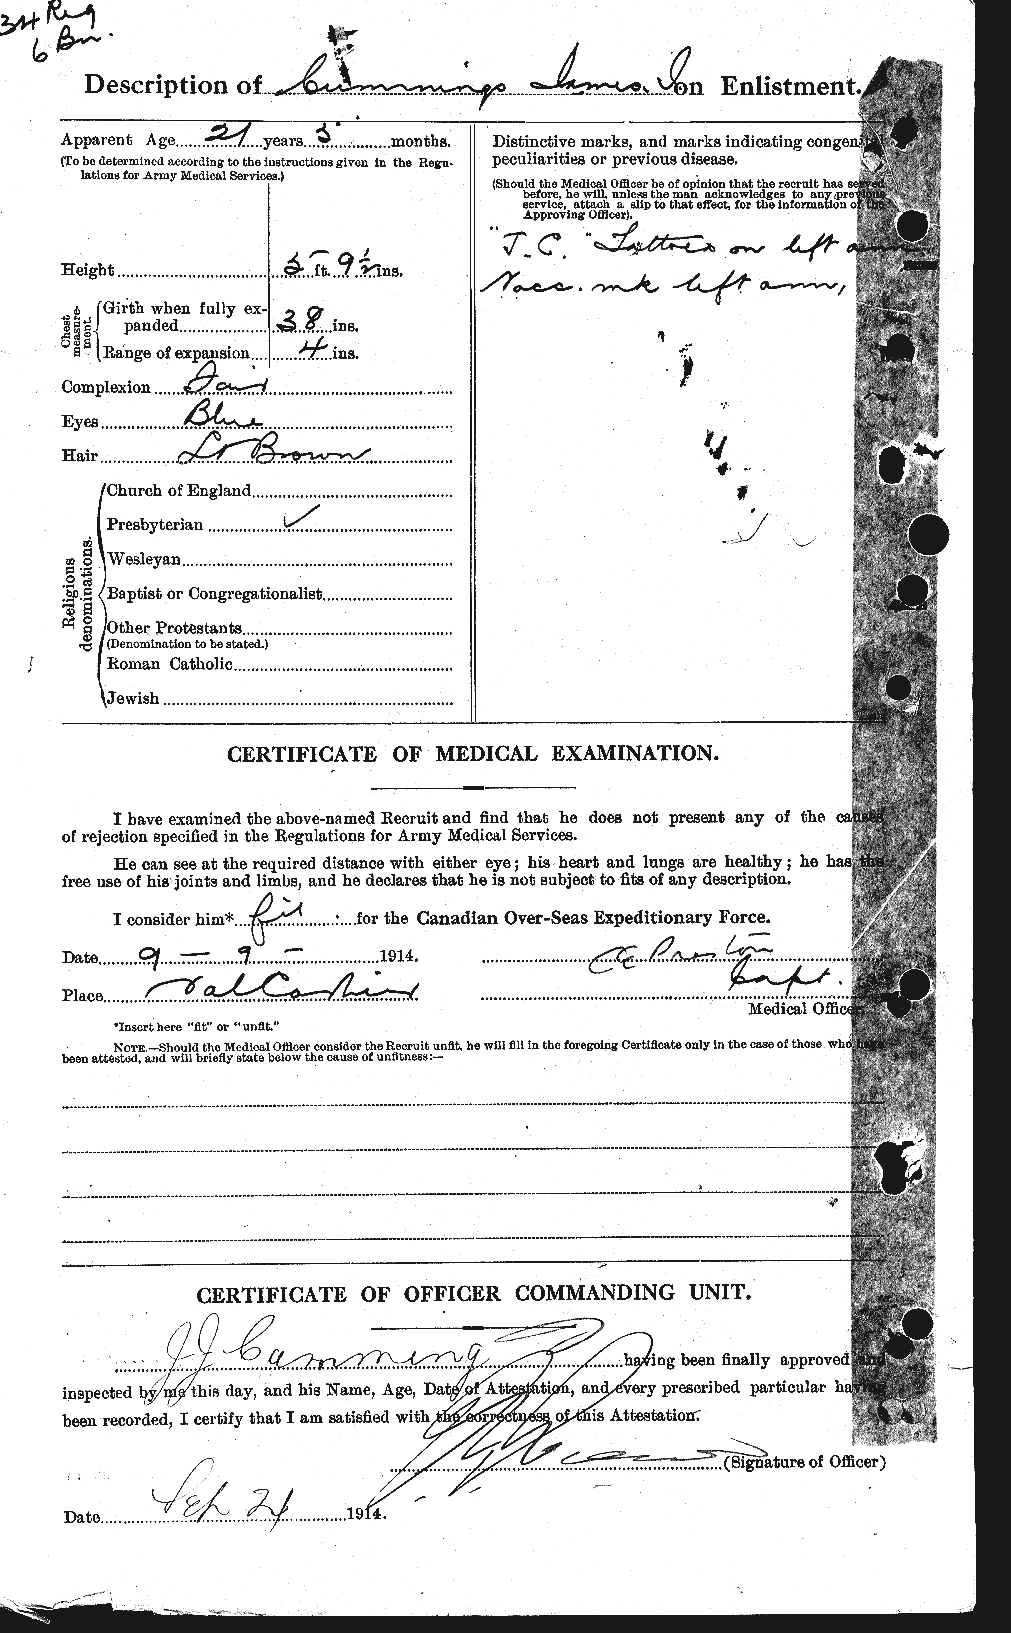 Personnel Records of the First World War - CEF 071086b